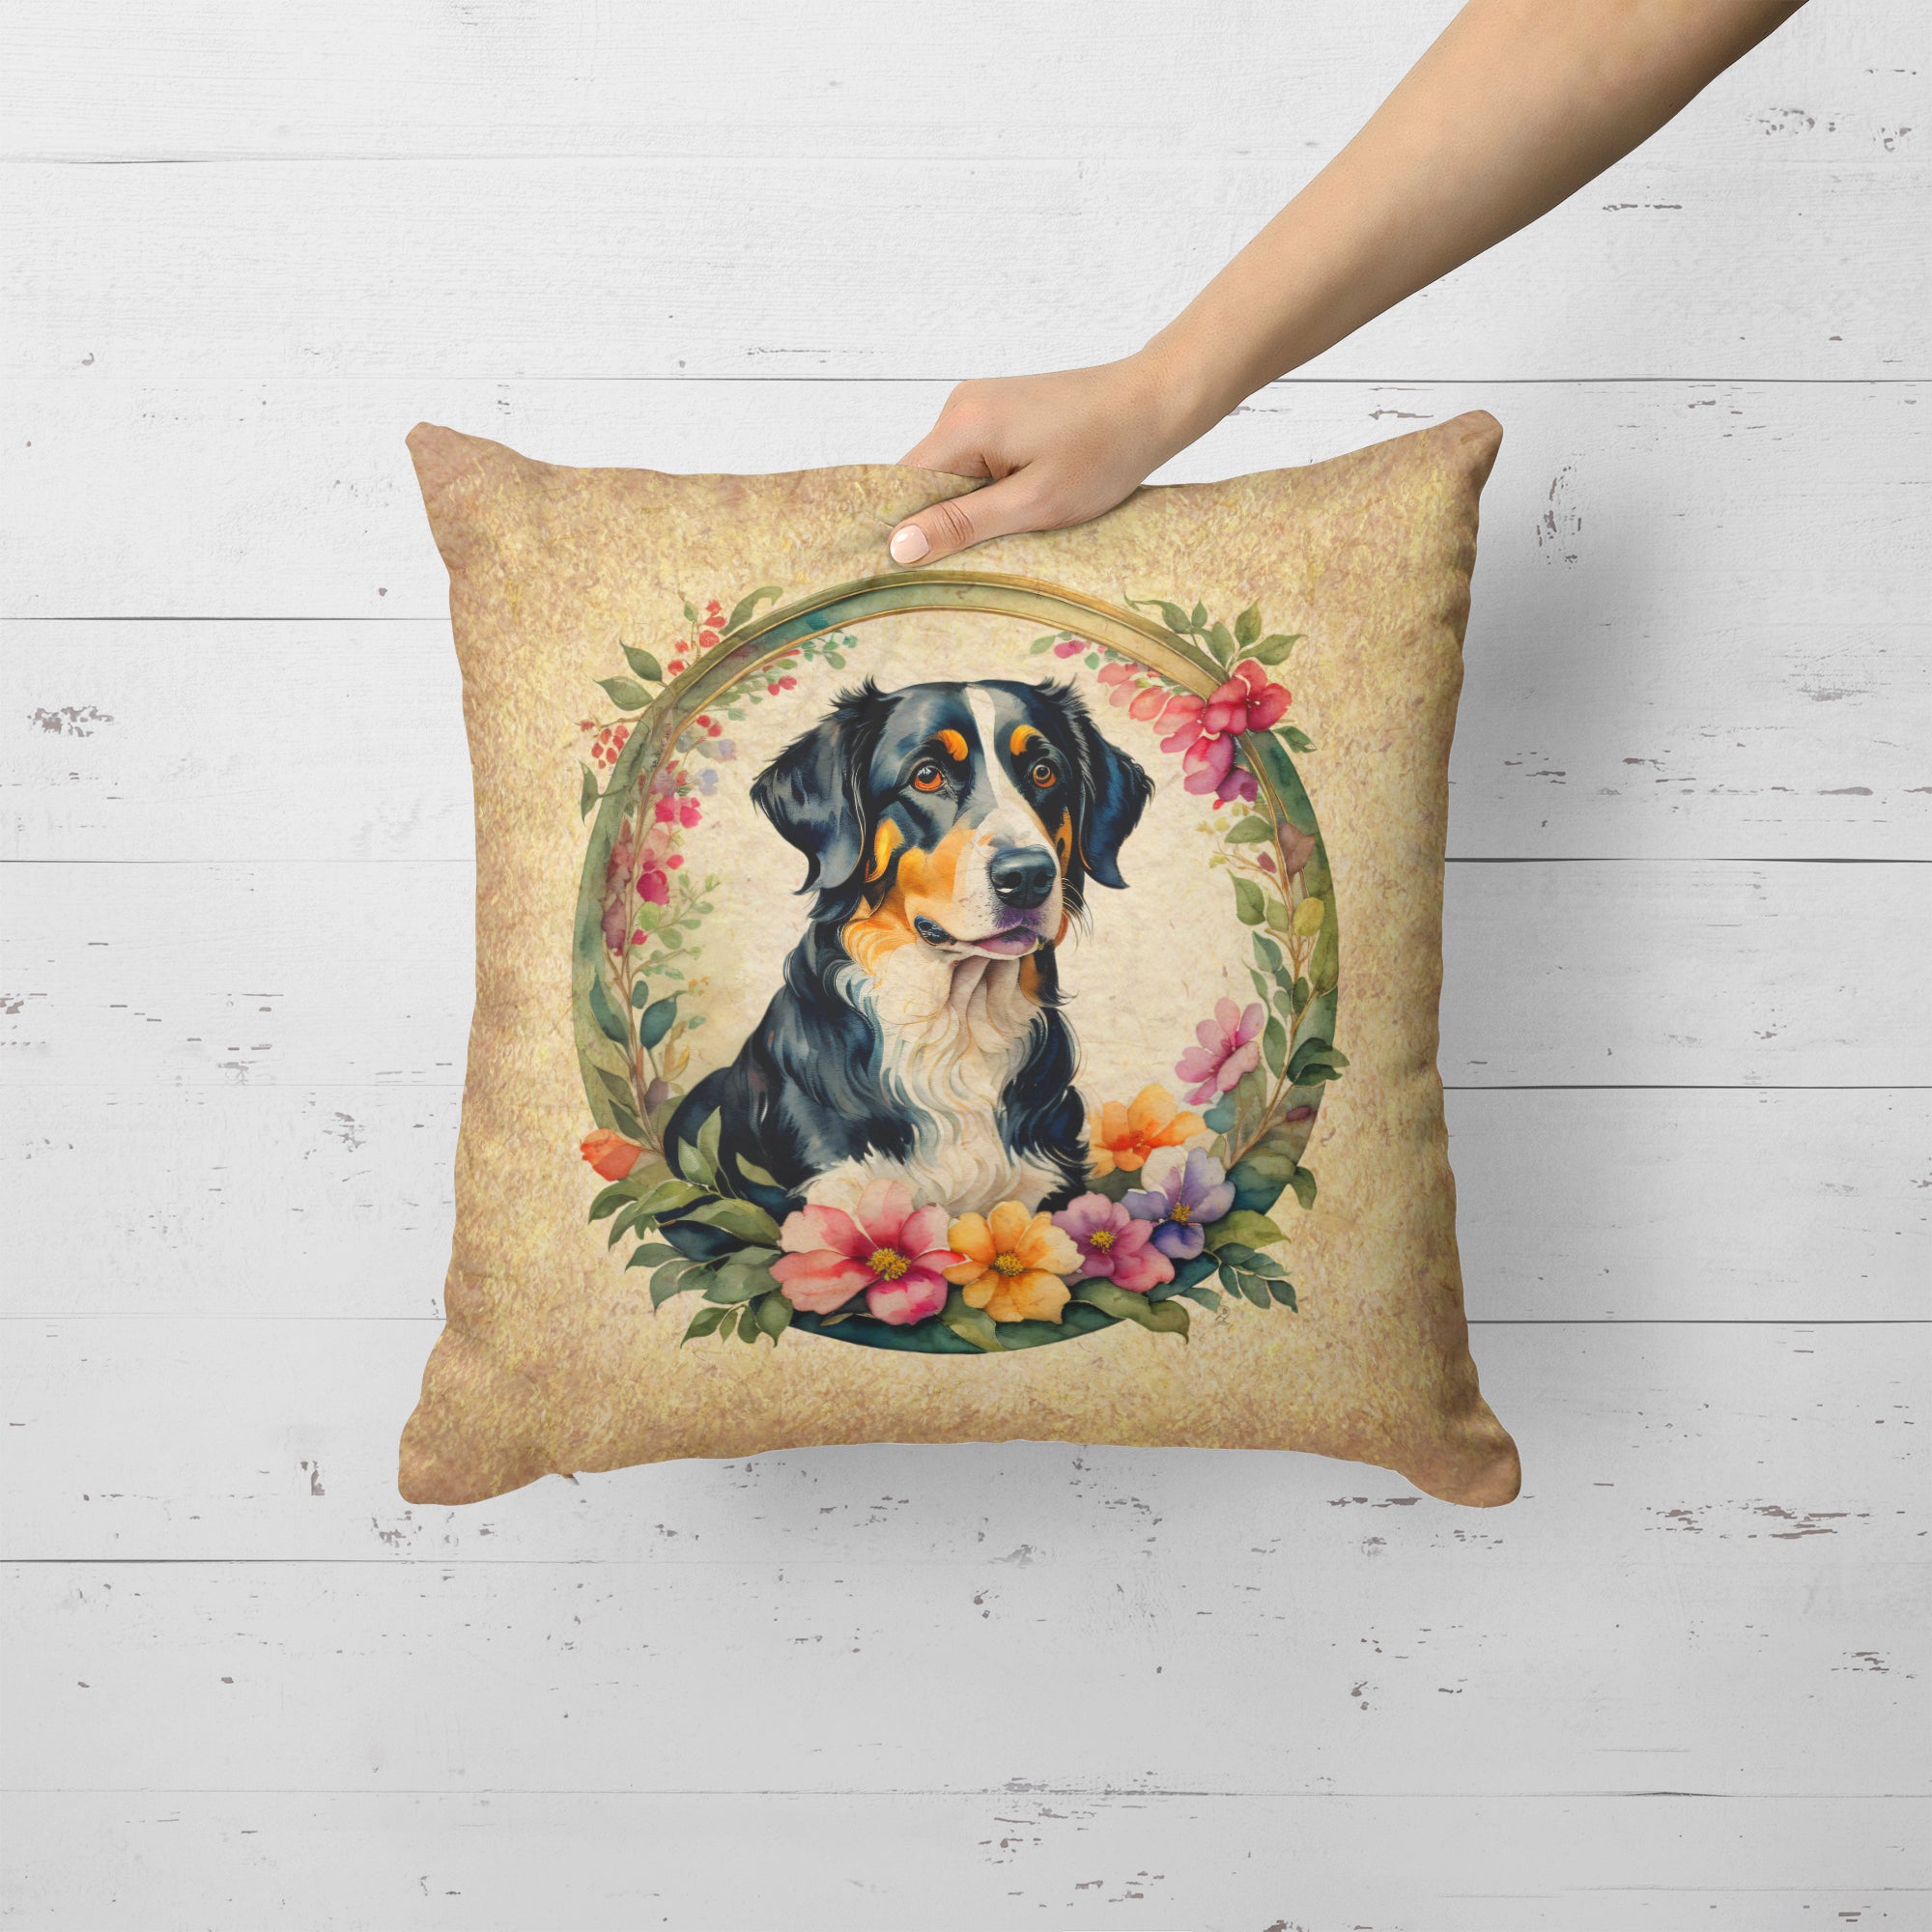 Buy this Appenzeller Sennenhund and Flowers Fabric Decorative Pillow